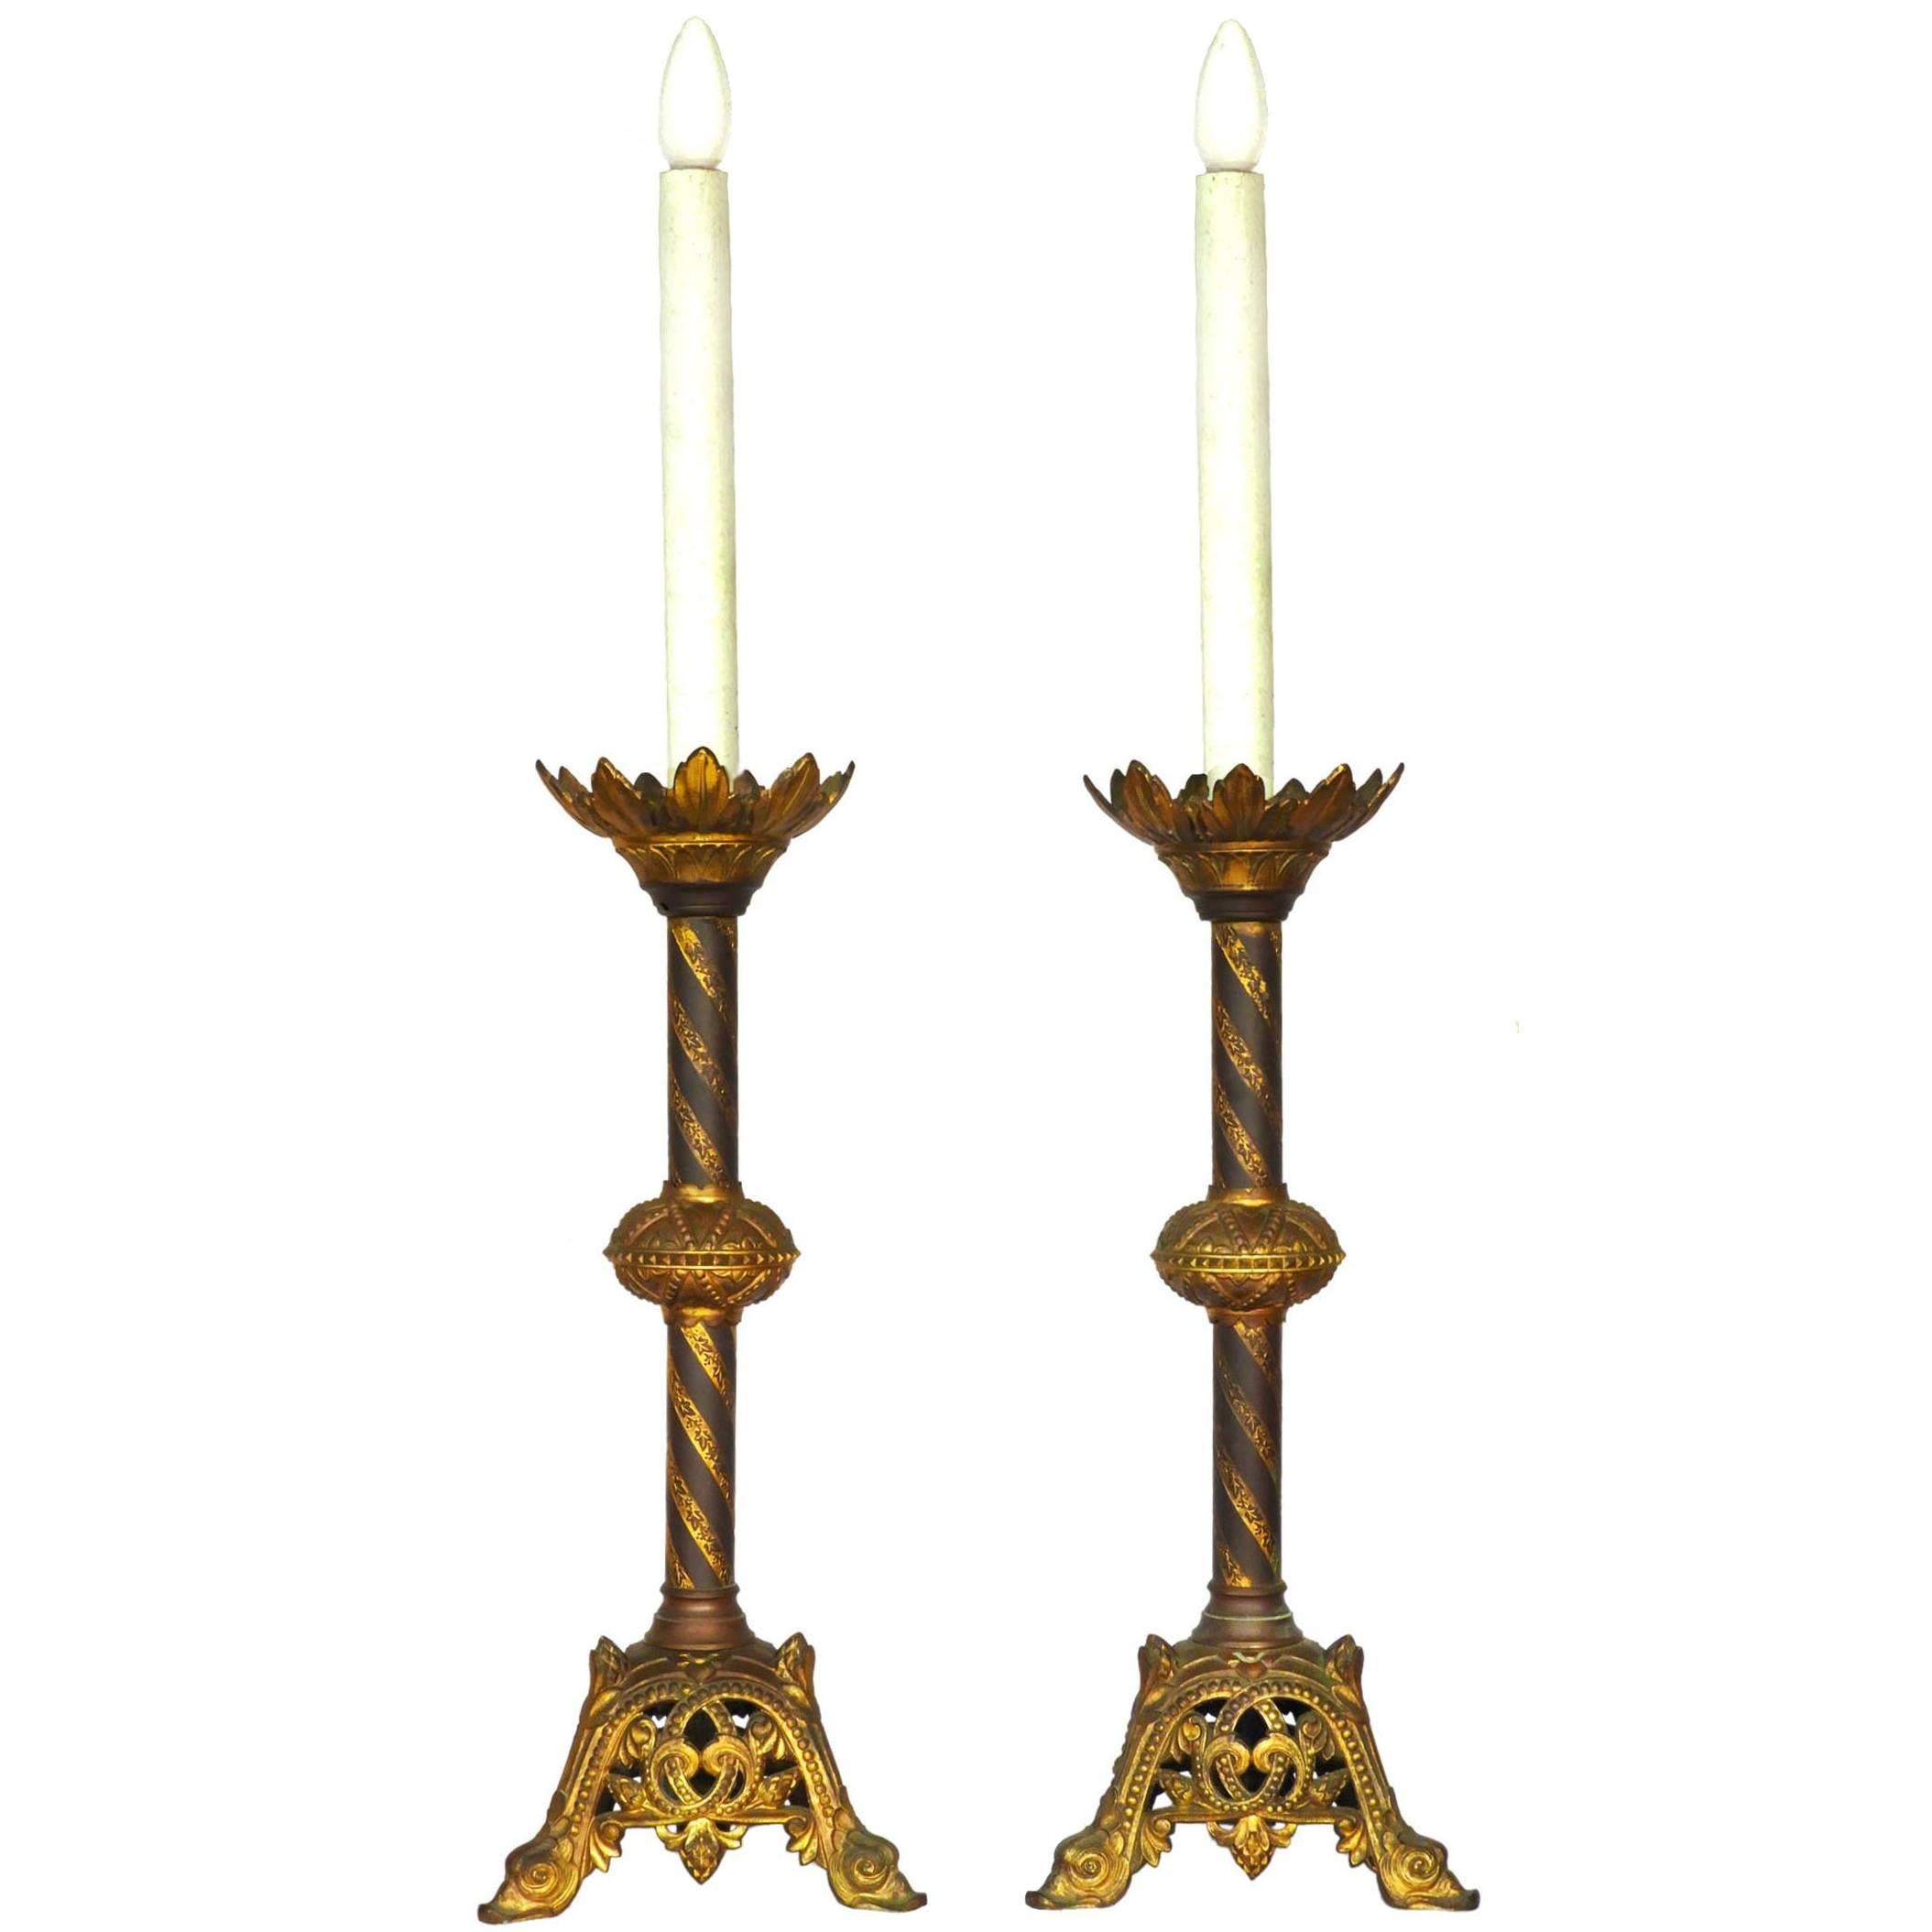 Pair of Candlestick Lamps French Church Gothic Revival, circa 1850 For Sale